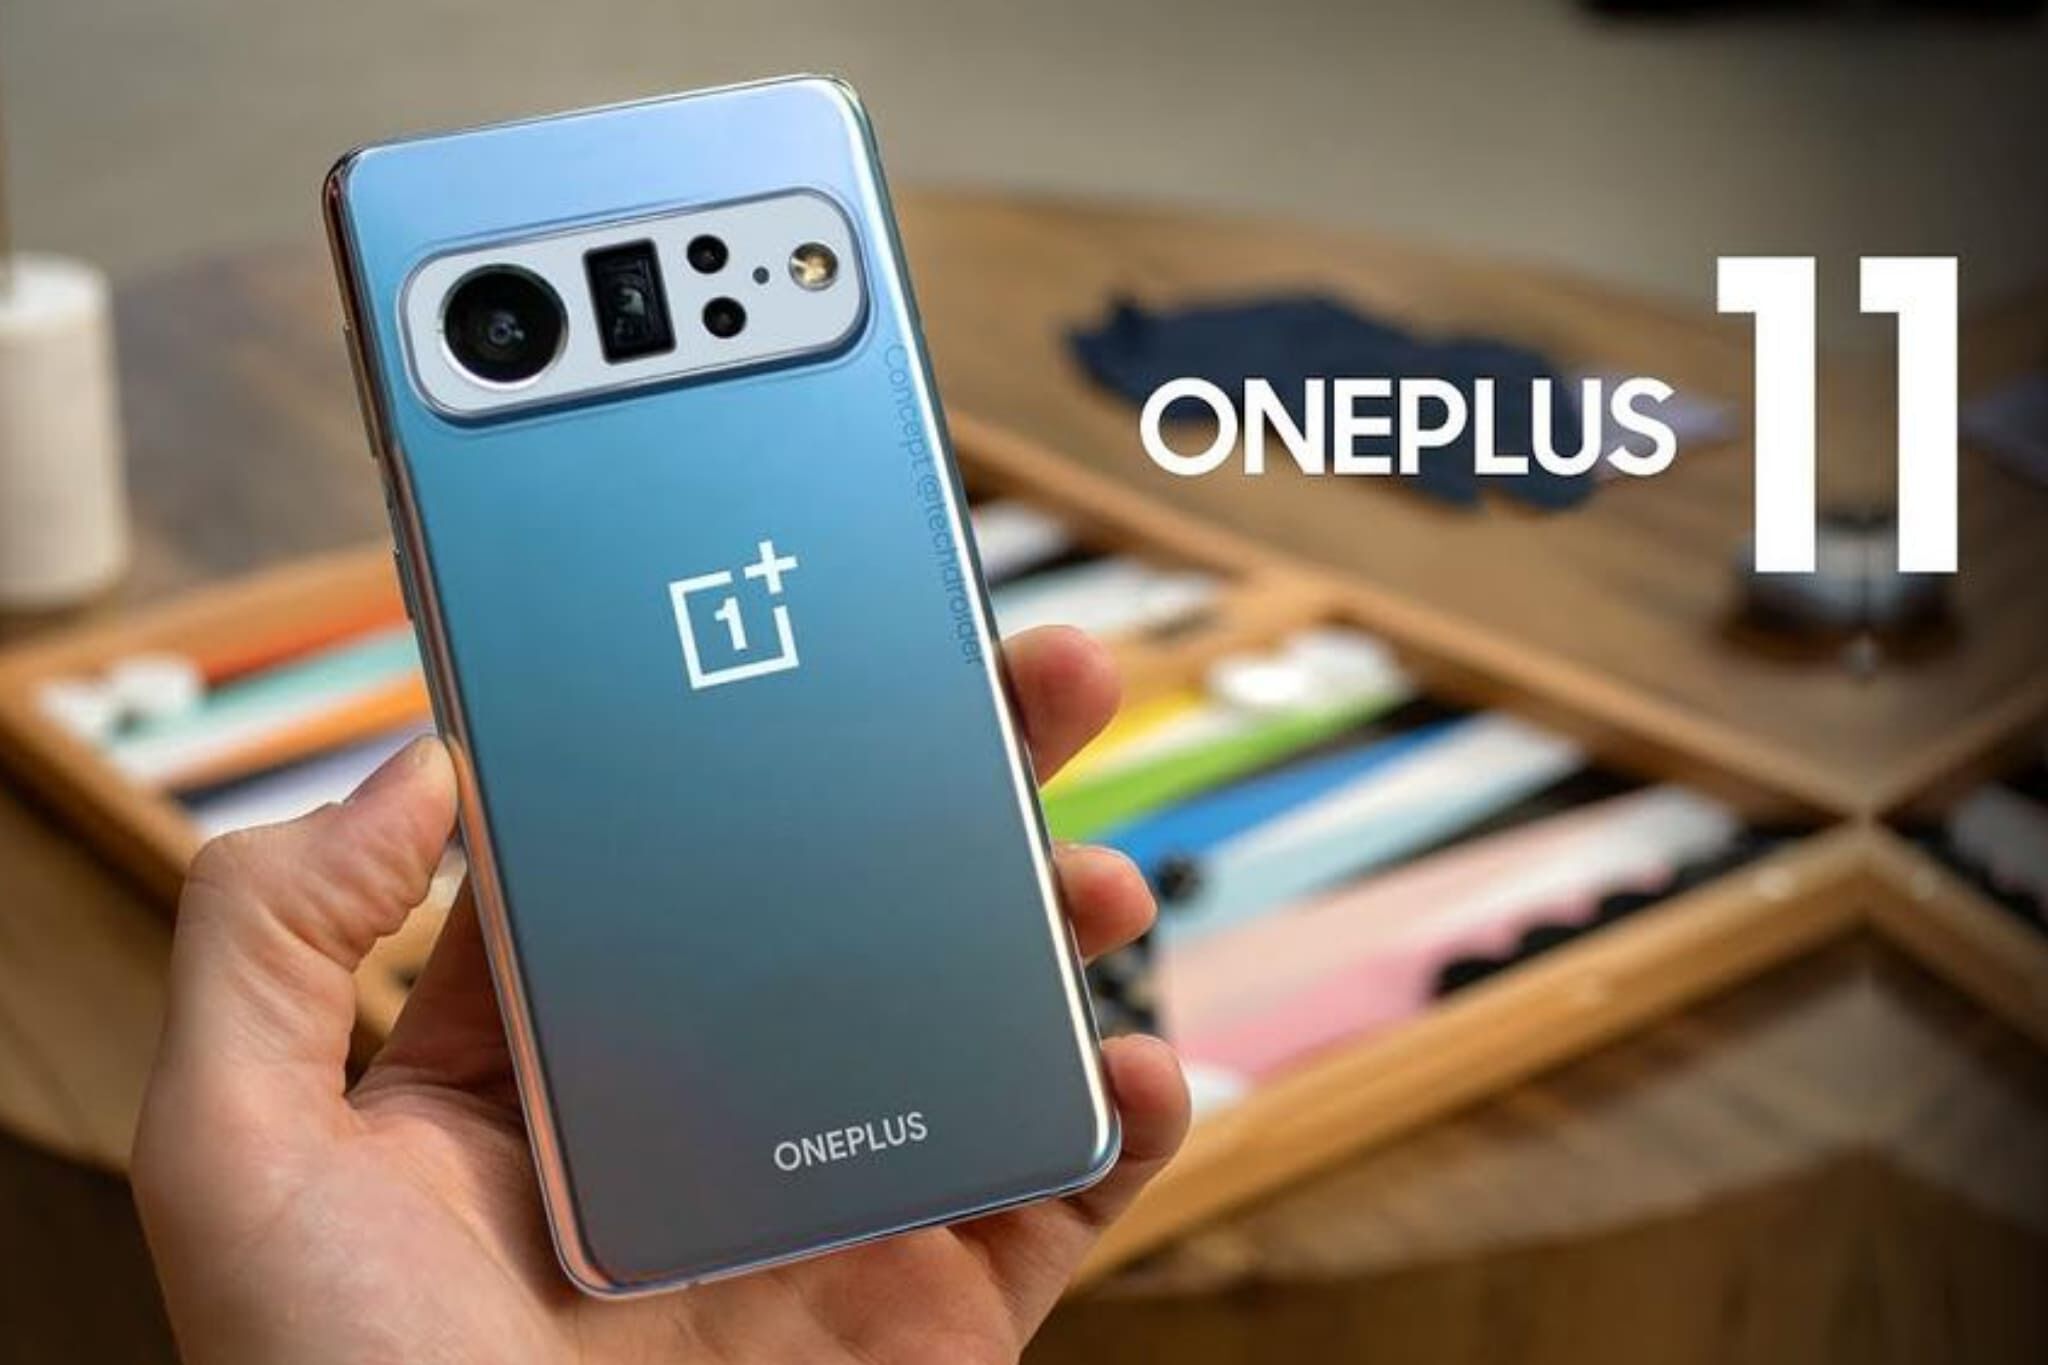 OnePlus will soon launch a smartphone equipped with SM8550 SoC, will get many other features